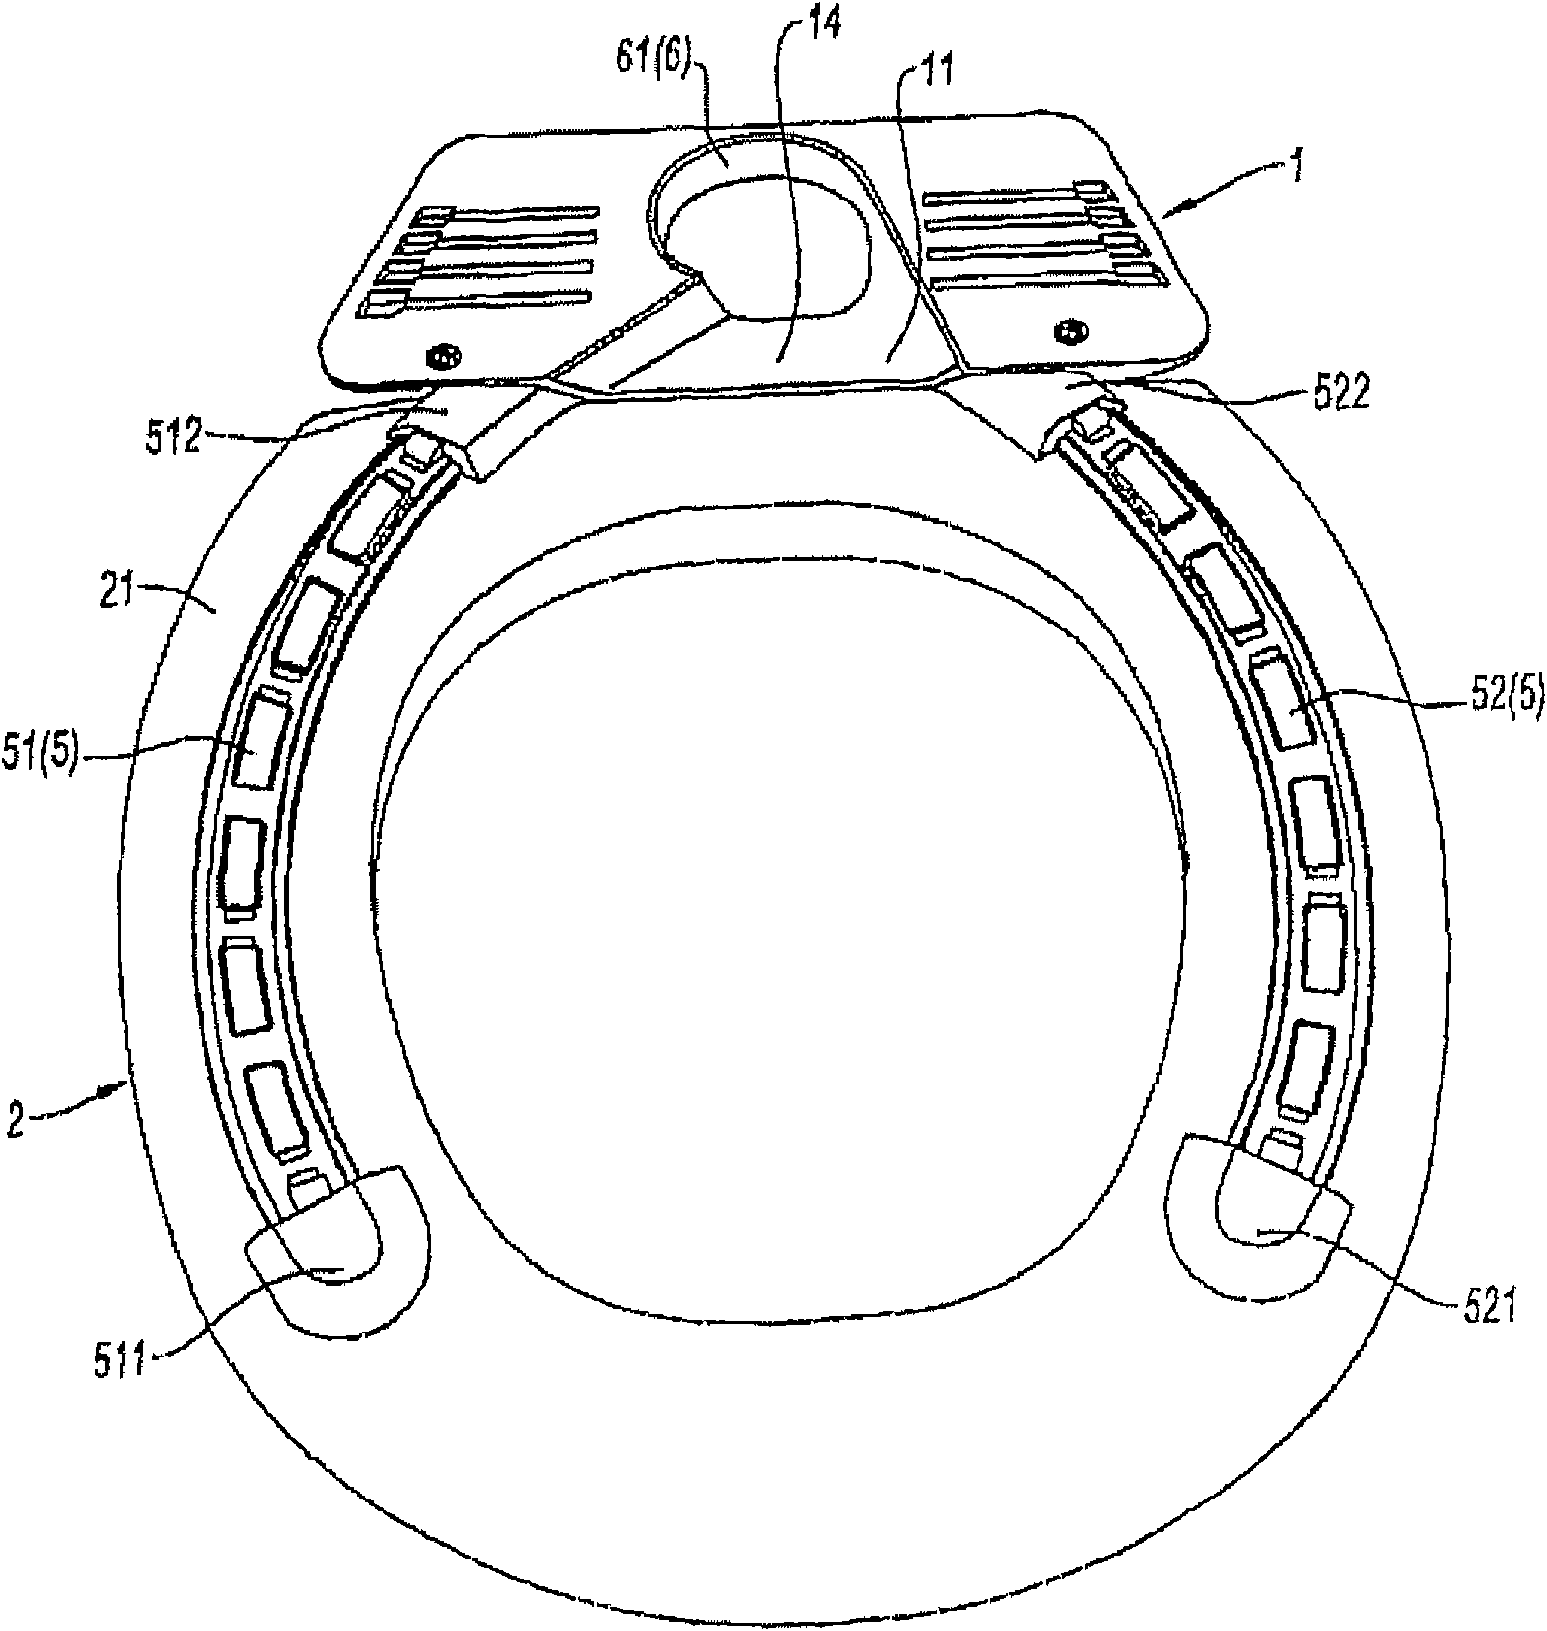 Toilet bowl assembly with air aspiration and filtration